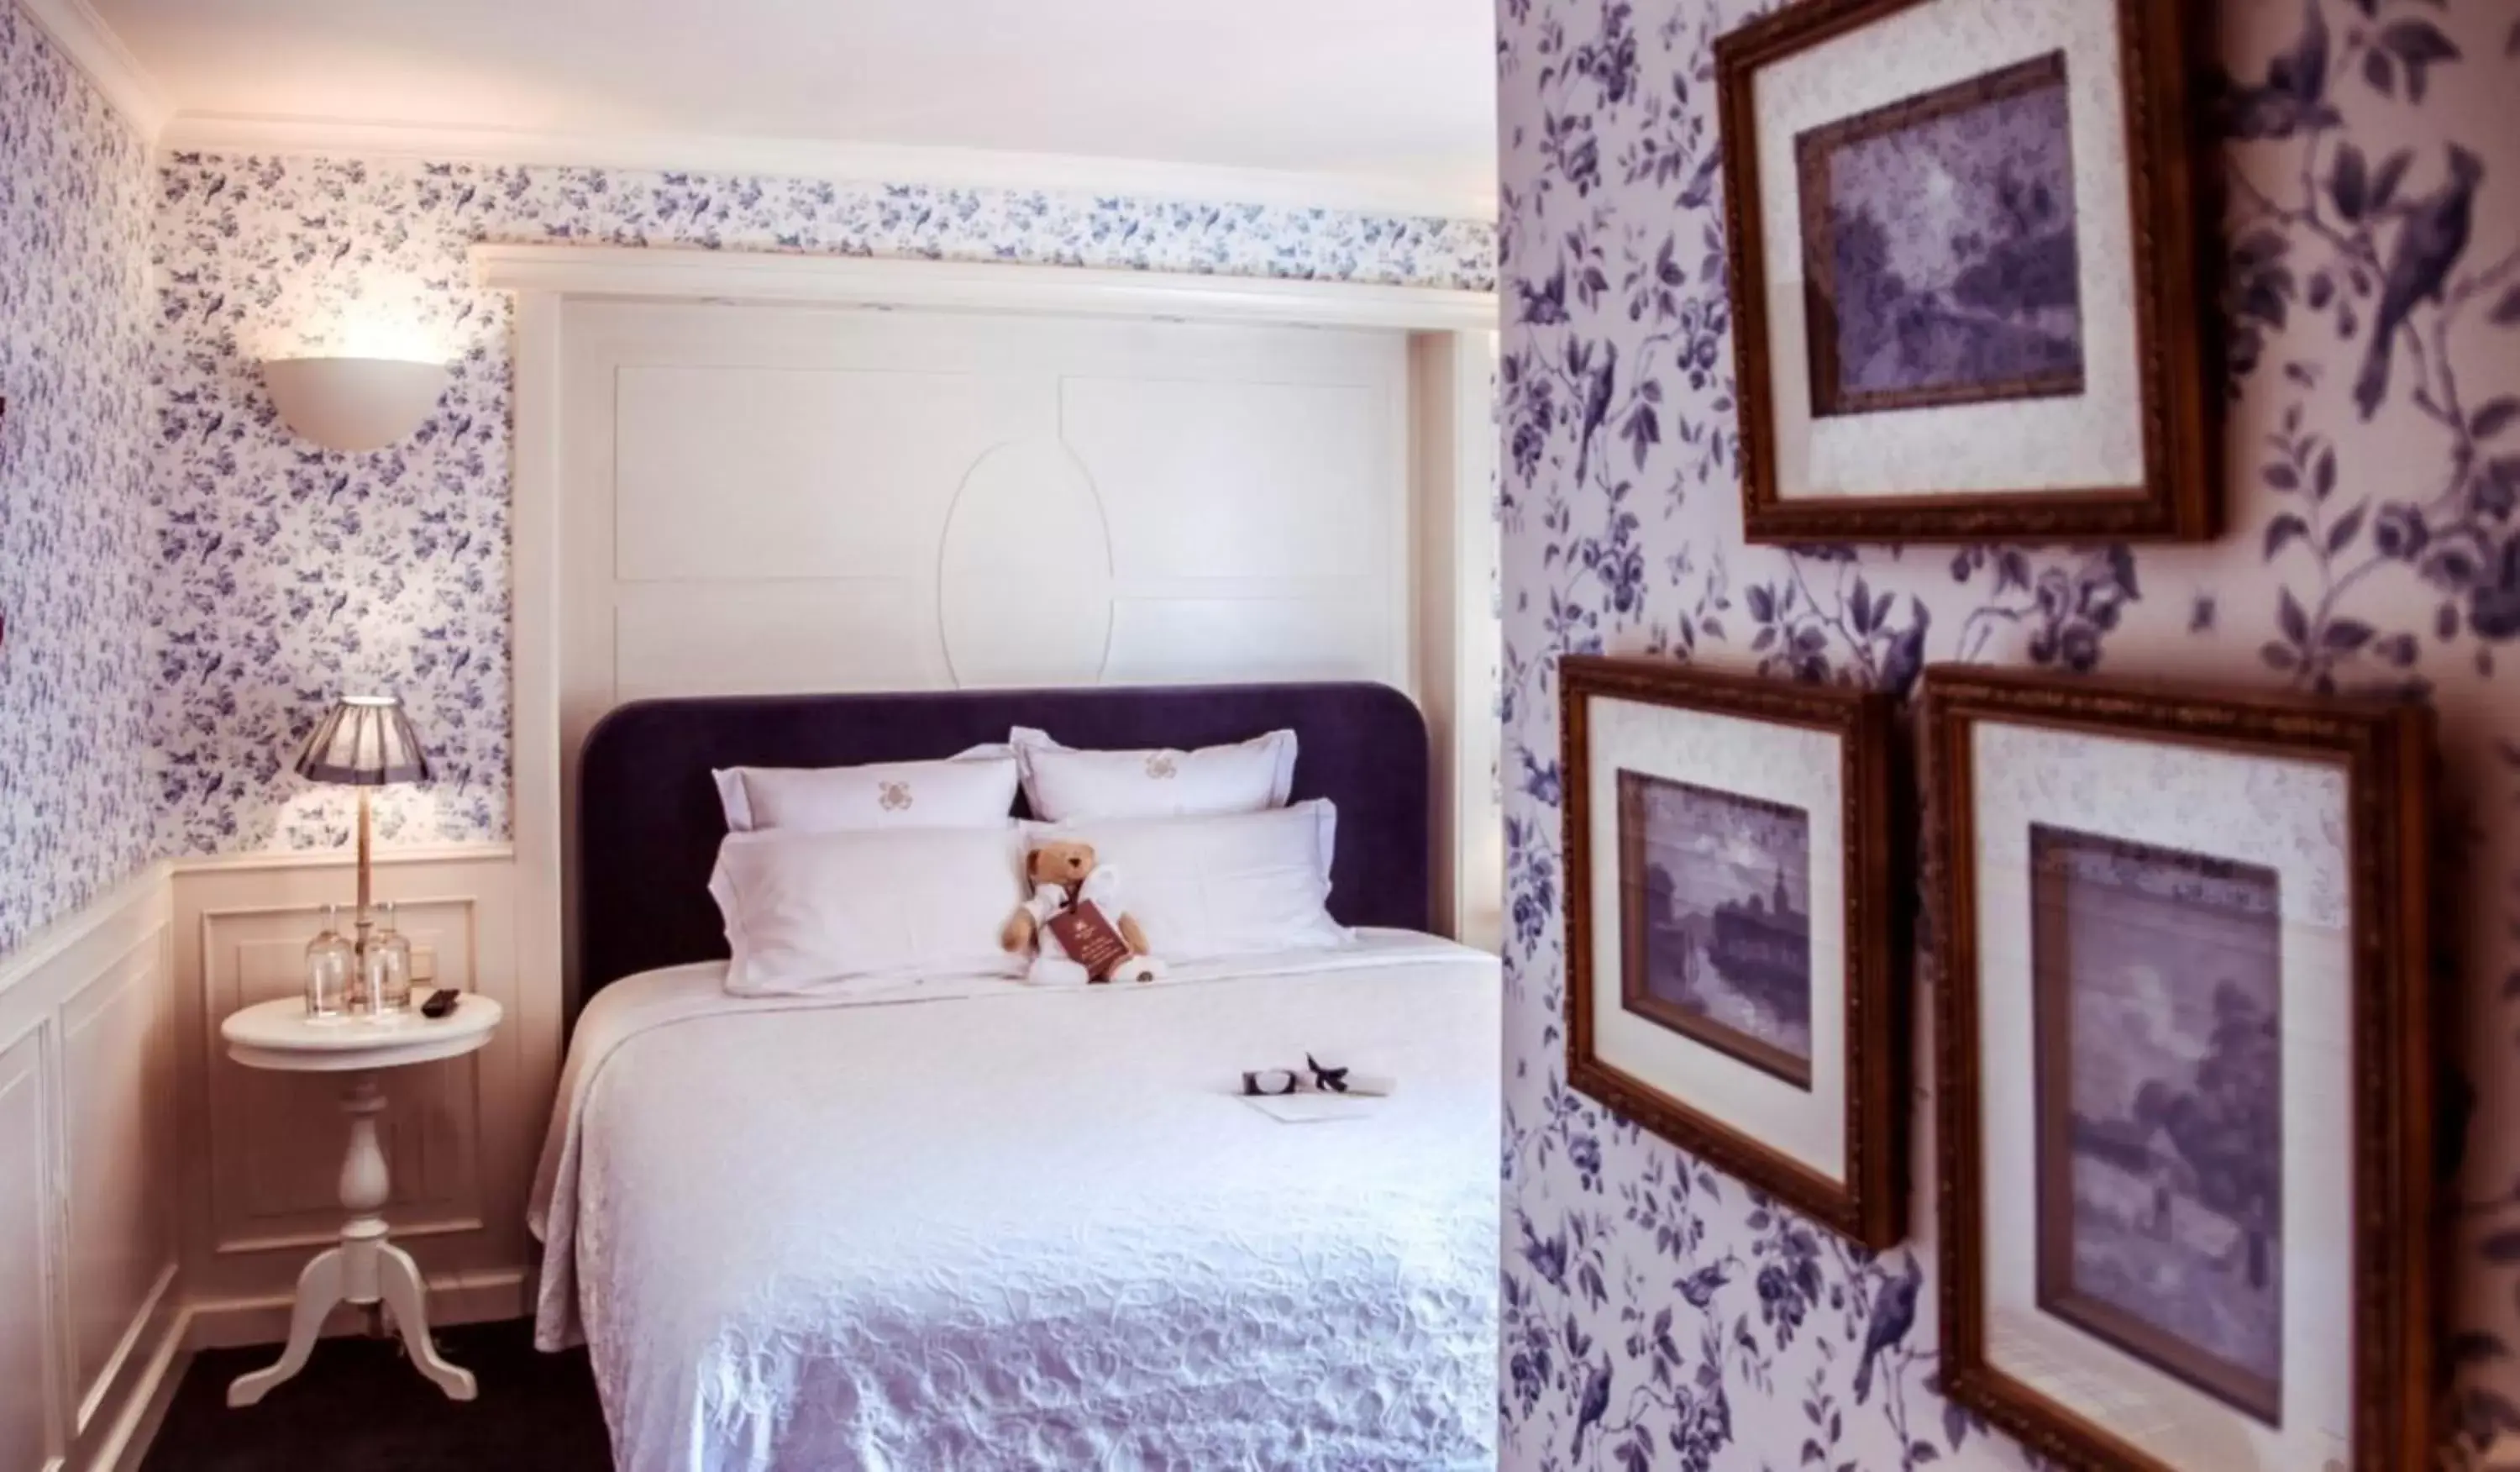 Bed, Room Photo in Hotel De Orangerie by CW Hotel Collection - Small Luxury Hotels of the World